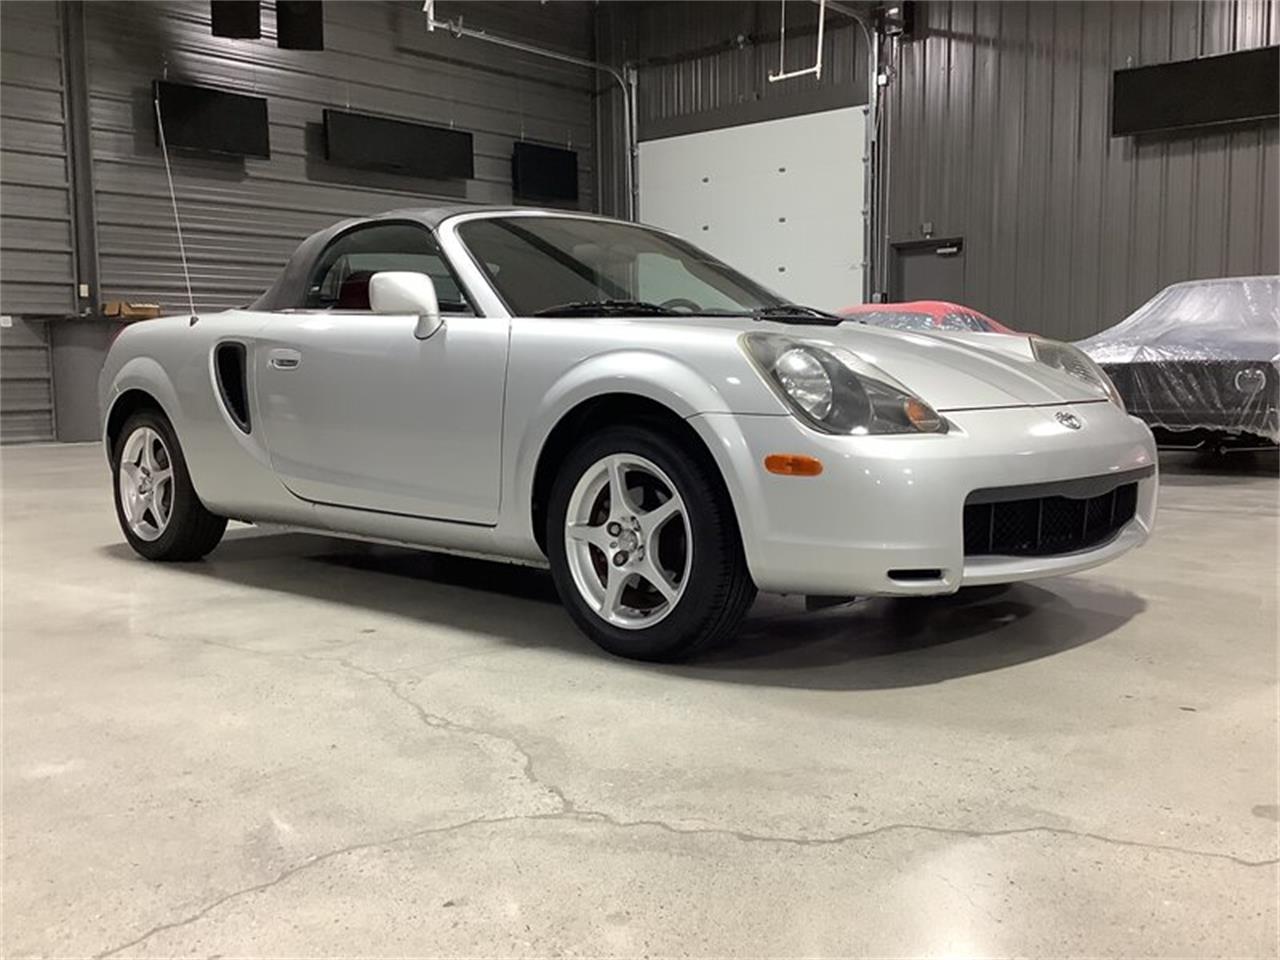 For Sale: 2001 Toyota MR2 Spyder in Knoxville, Tennessee for sale in Knoxville, TN